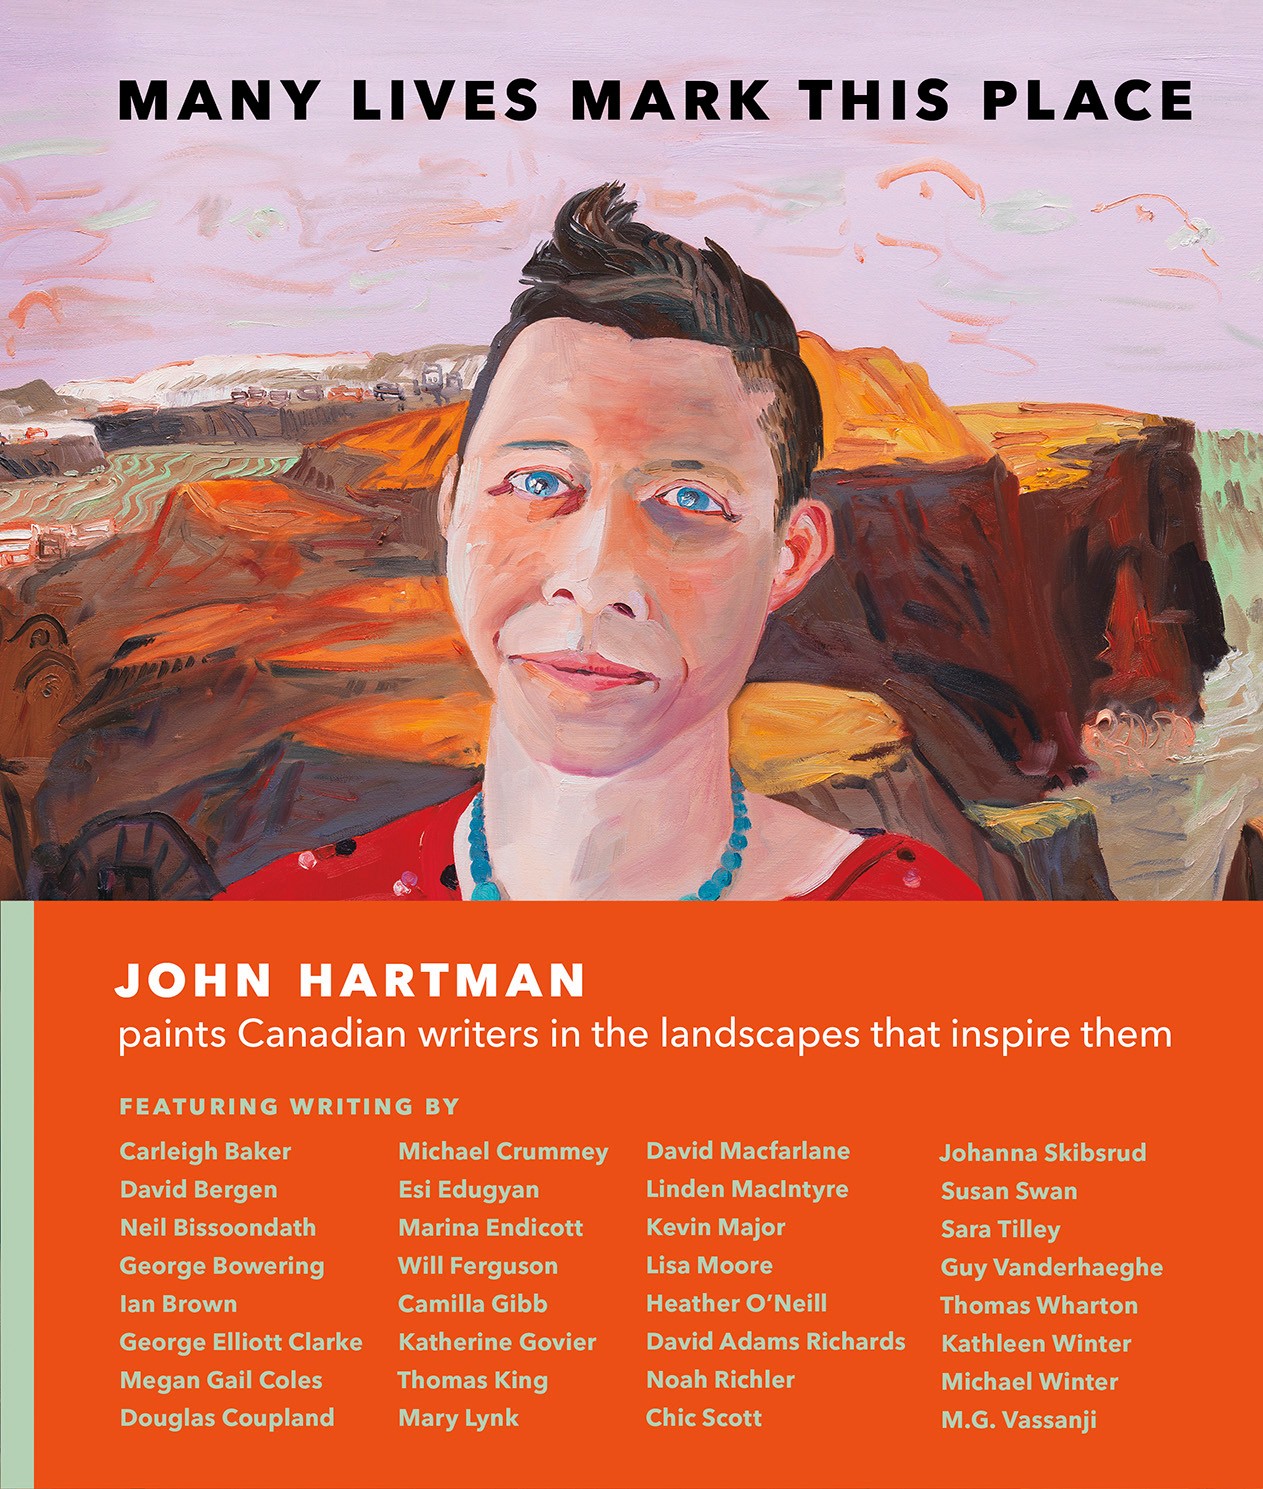 Text overlay Many Lives Mark this Place John Hartman. Oil painting of a person with short brown hair, wearing a red shirt and turquoise necklace 